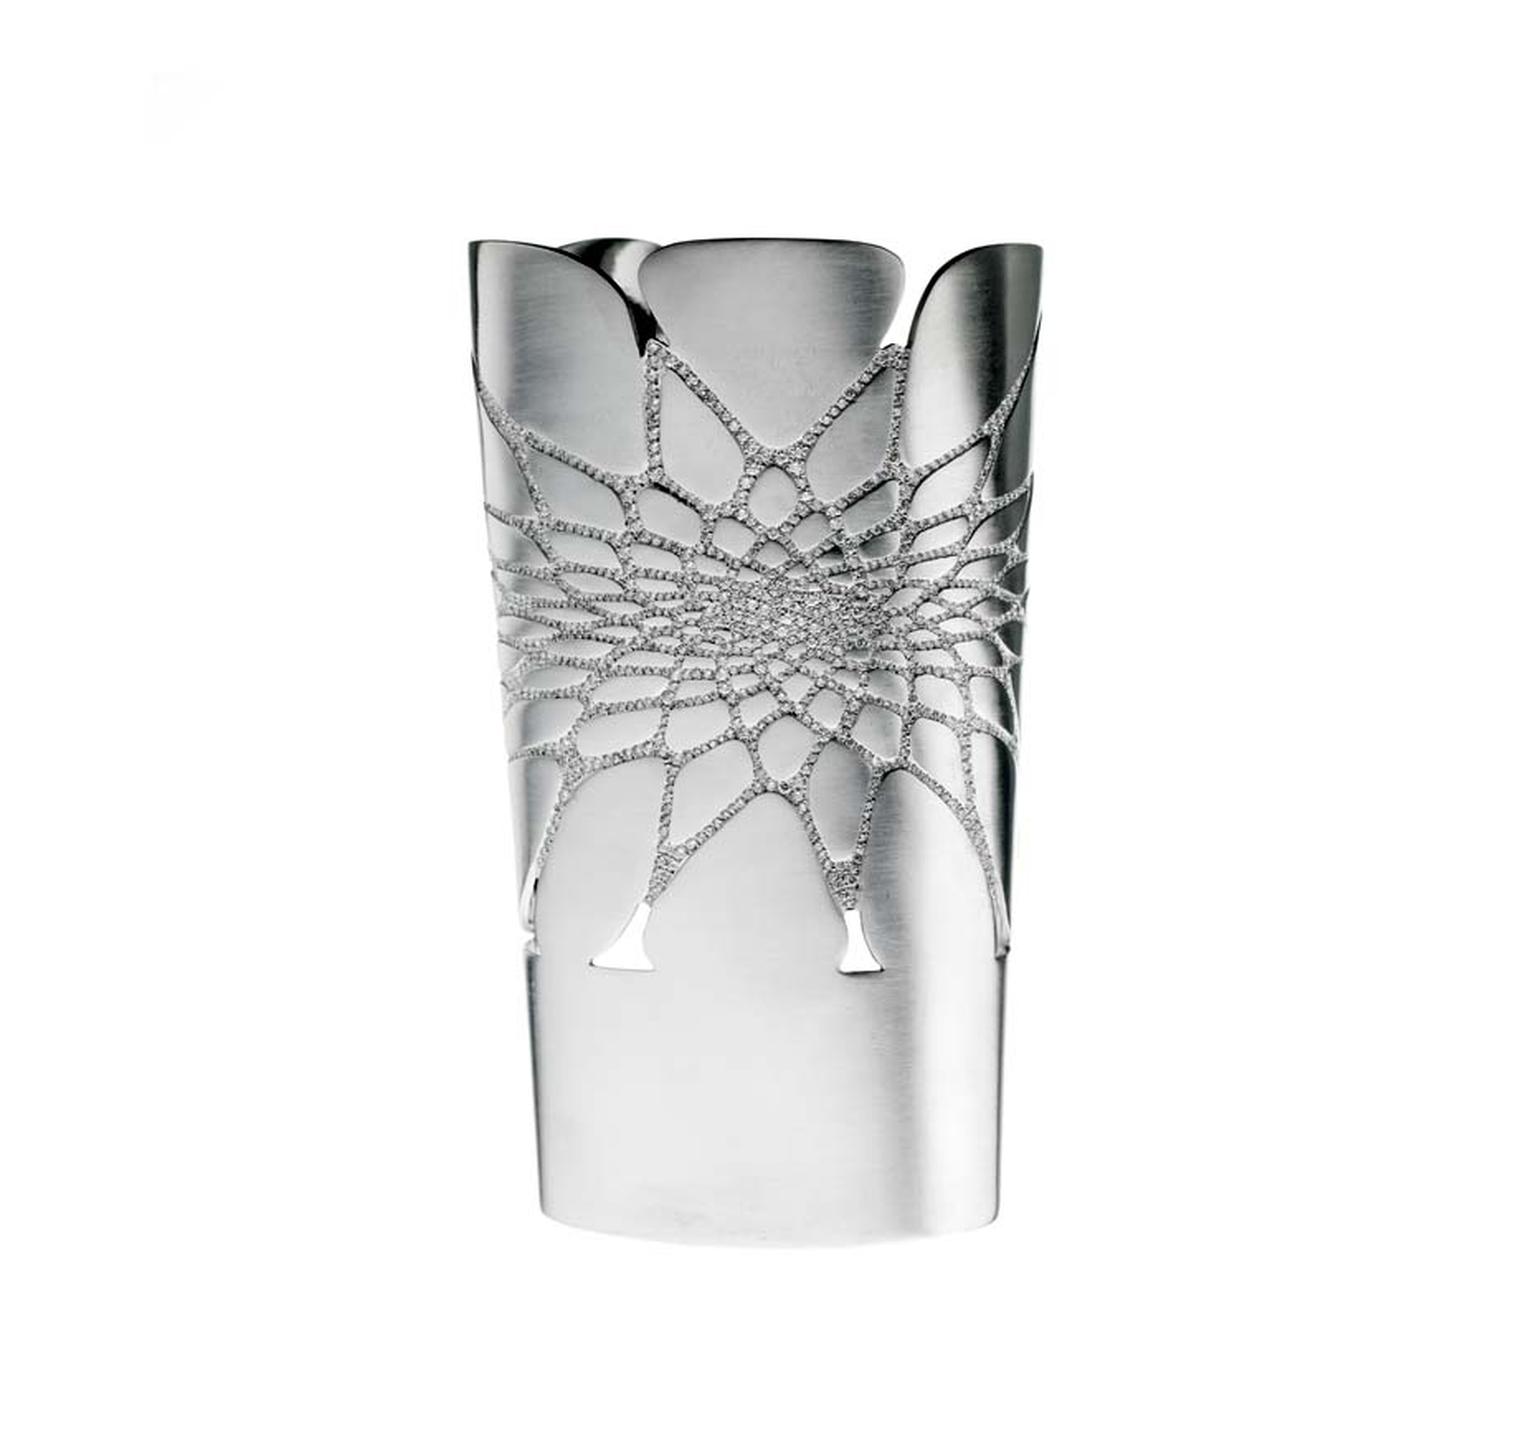 Celebrated international architect Dame Zaha Hadid has collaborated with Lebanese jewellery house Mouzannar to design a white gold cuff set with 1,048 diamonds.